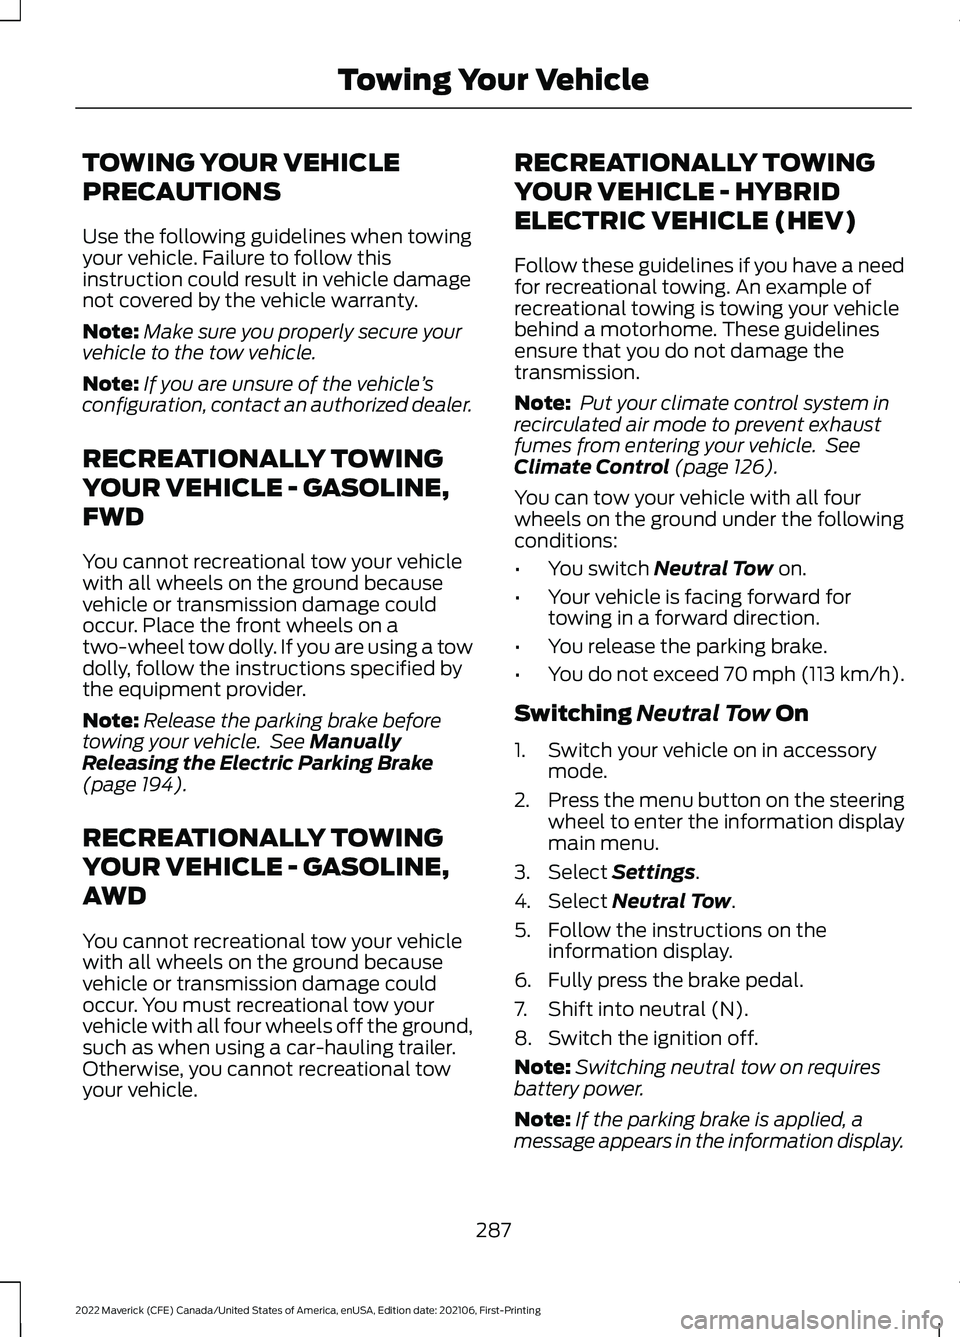 FORD MAVERICK 2022  Owners Manual TOWING YOUR VEHICLE
PRECAUTIONS
Use the following guidelines when towing
your vehicle. Failure to follow this
instruction could result in vehicle damage
not covered by the vehicle warranty.
Note:
Make